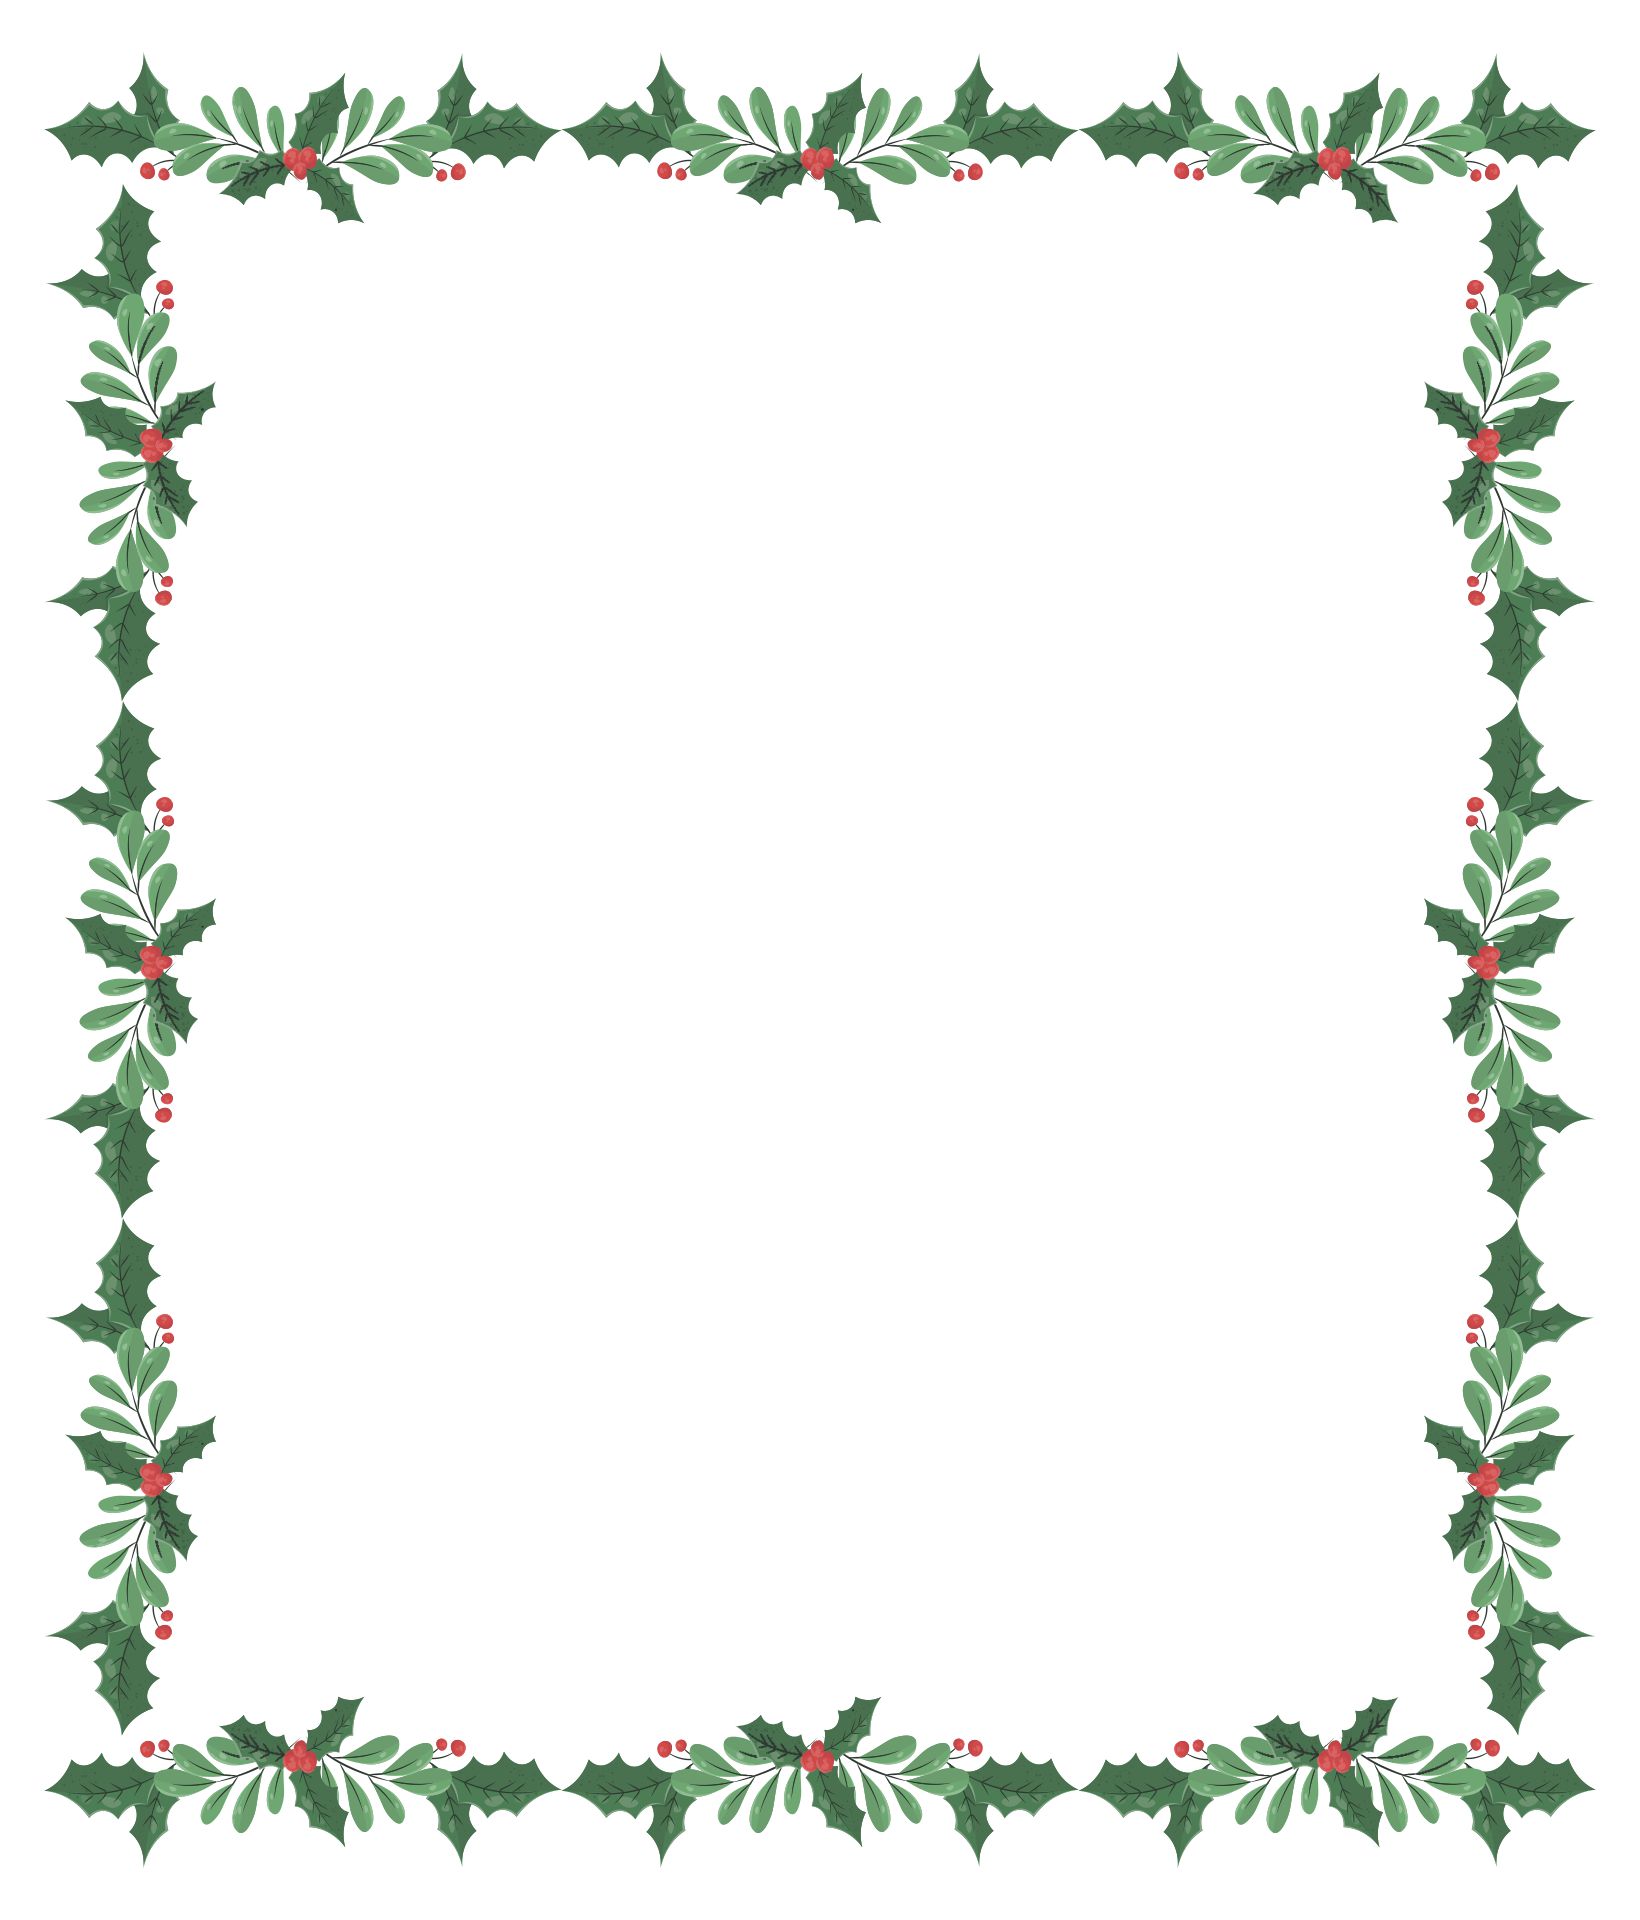 Printable Christmas Border Paper Stationery Get What You Need For Free